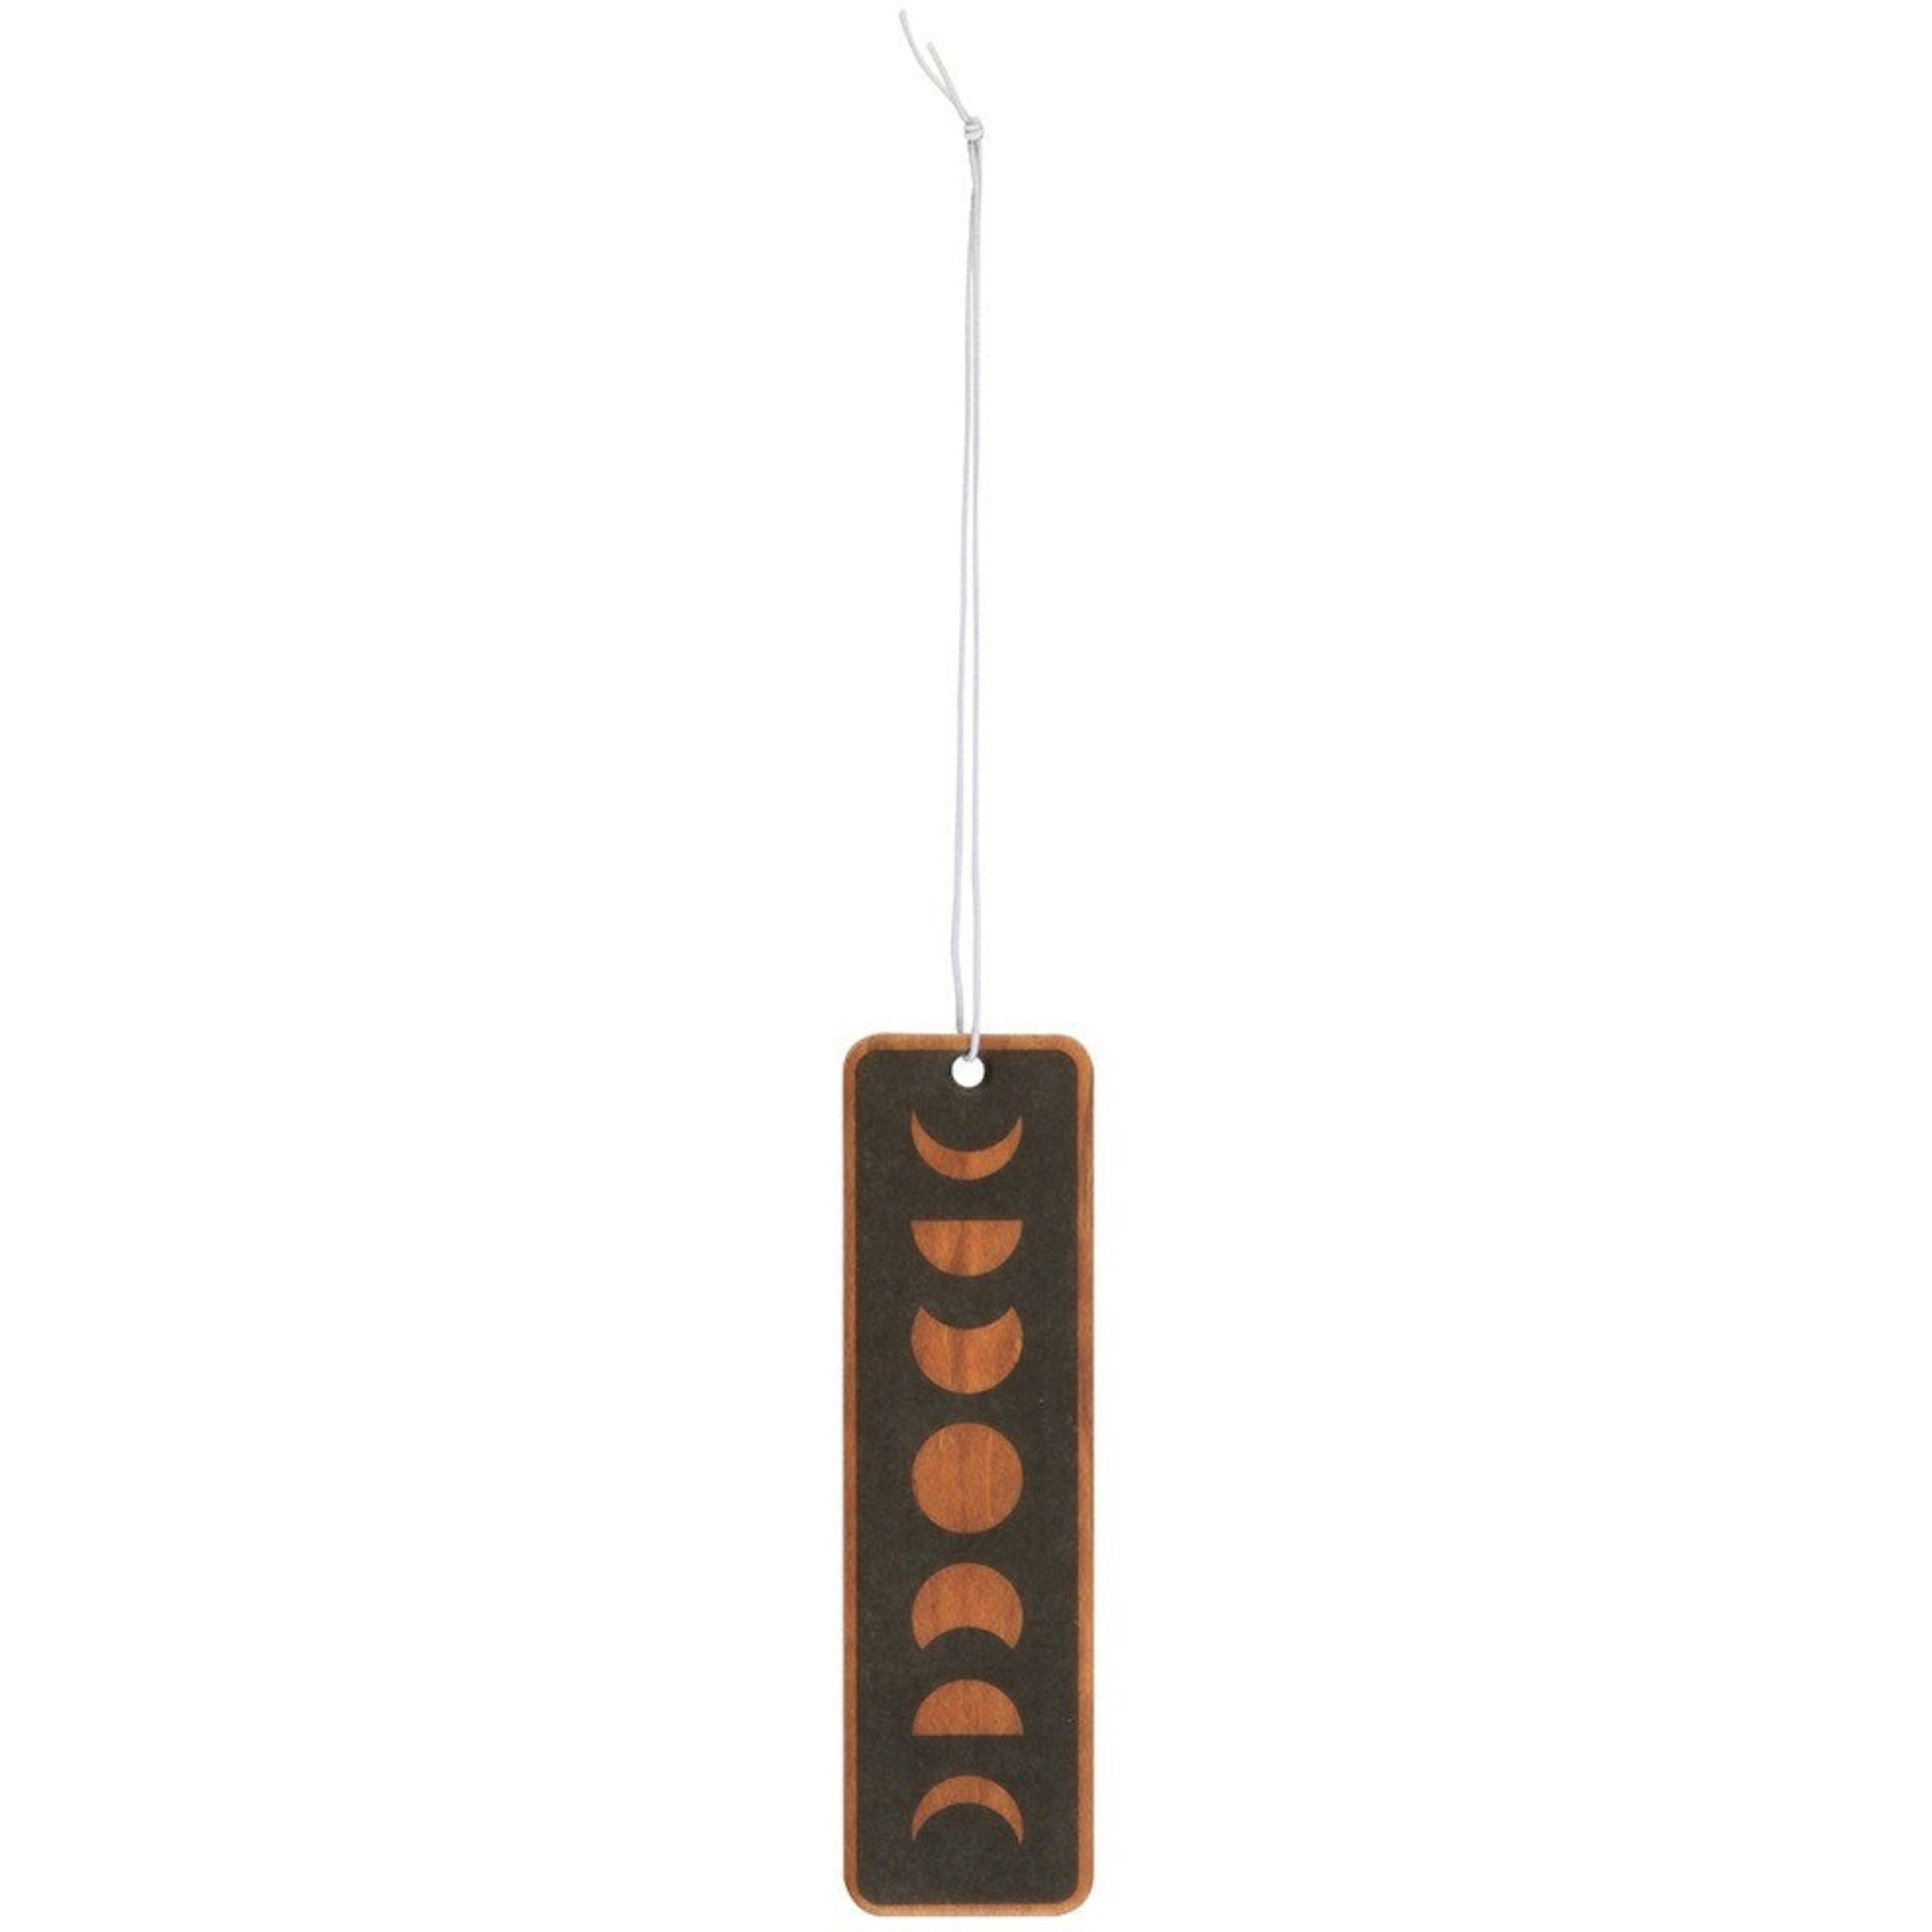 Moon Phase Air Freshener- Peach Scented Besom Boutique